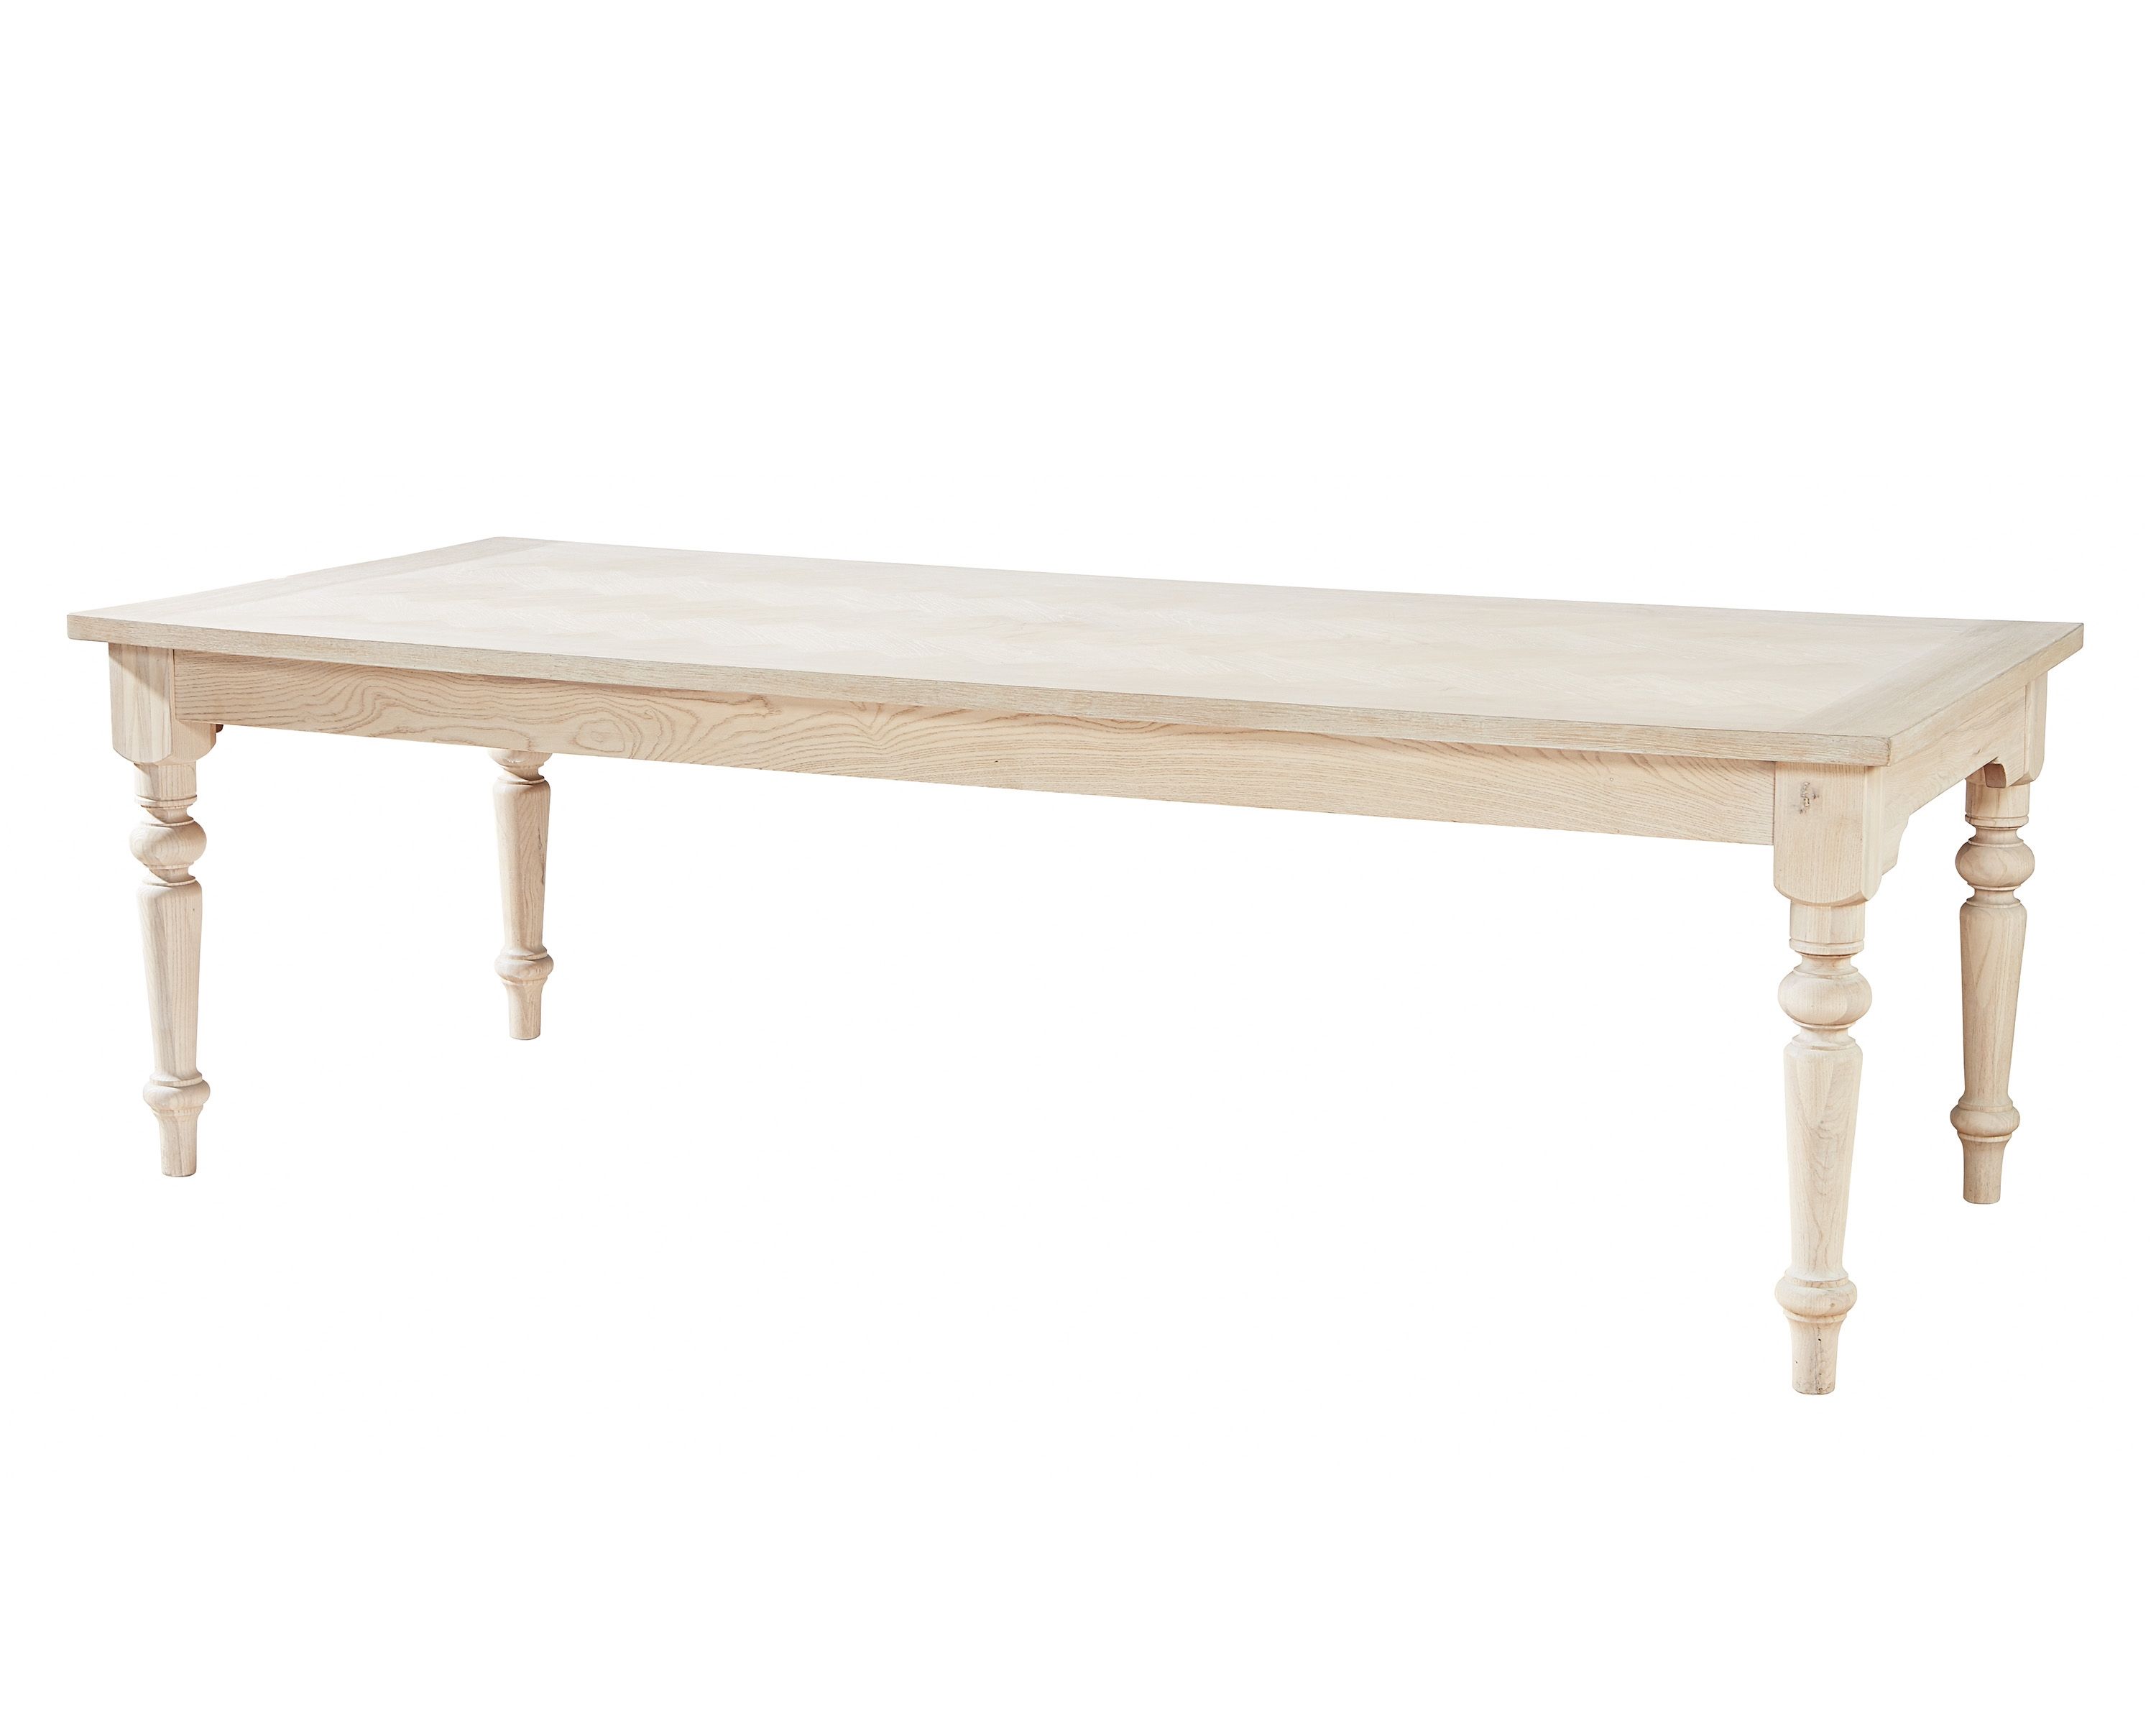 Popular Prairie Dining Table – Magnolia Home With Regard To Magnolia Home Prairie Dining Tables (View 2 of 25)